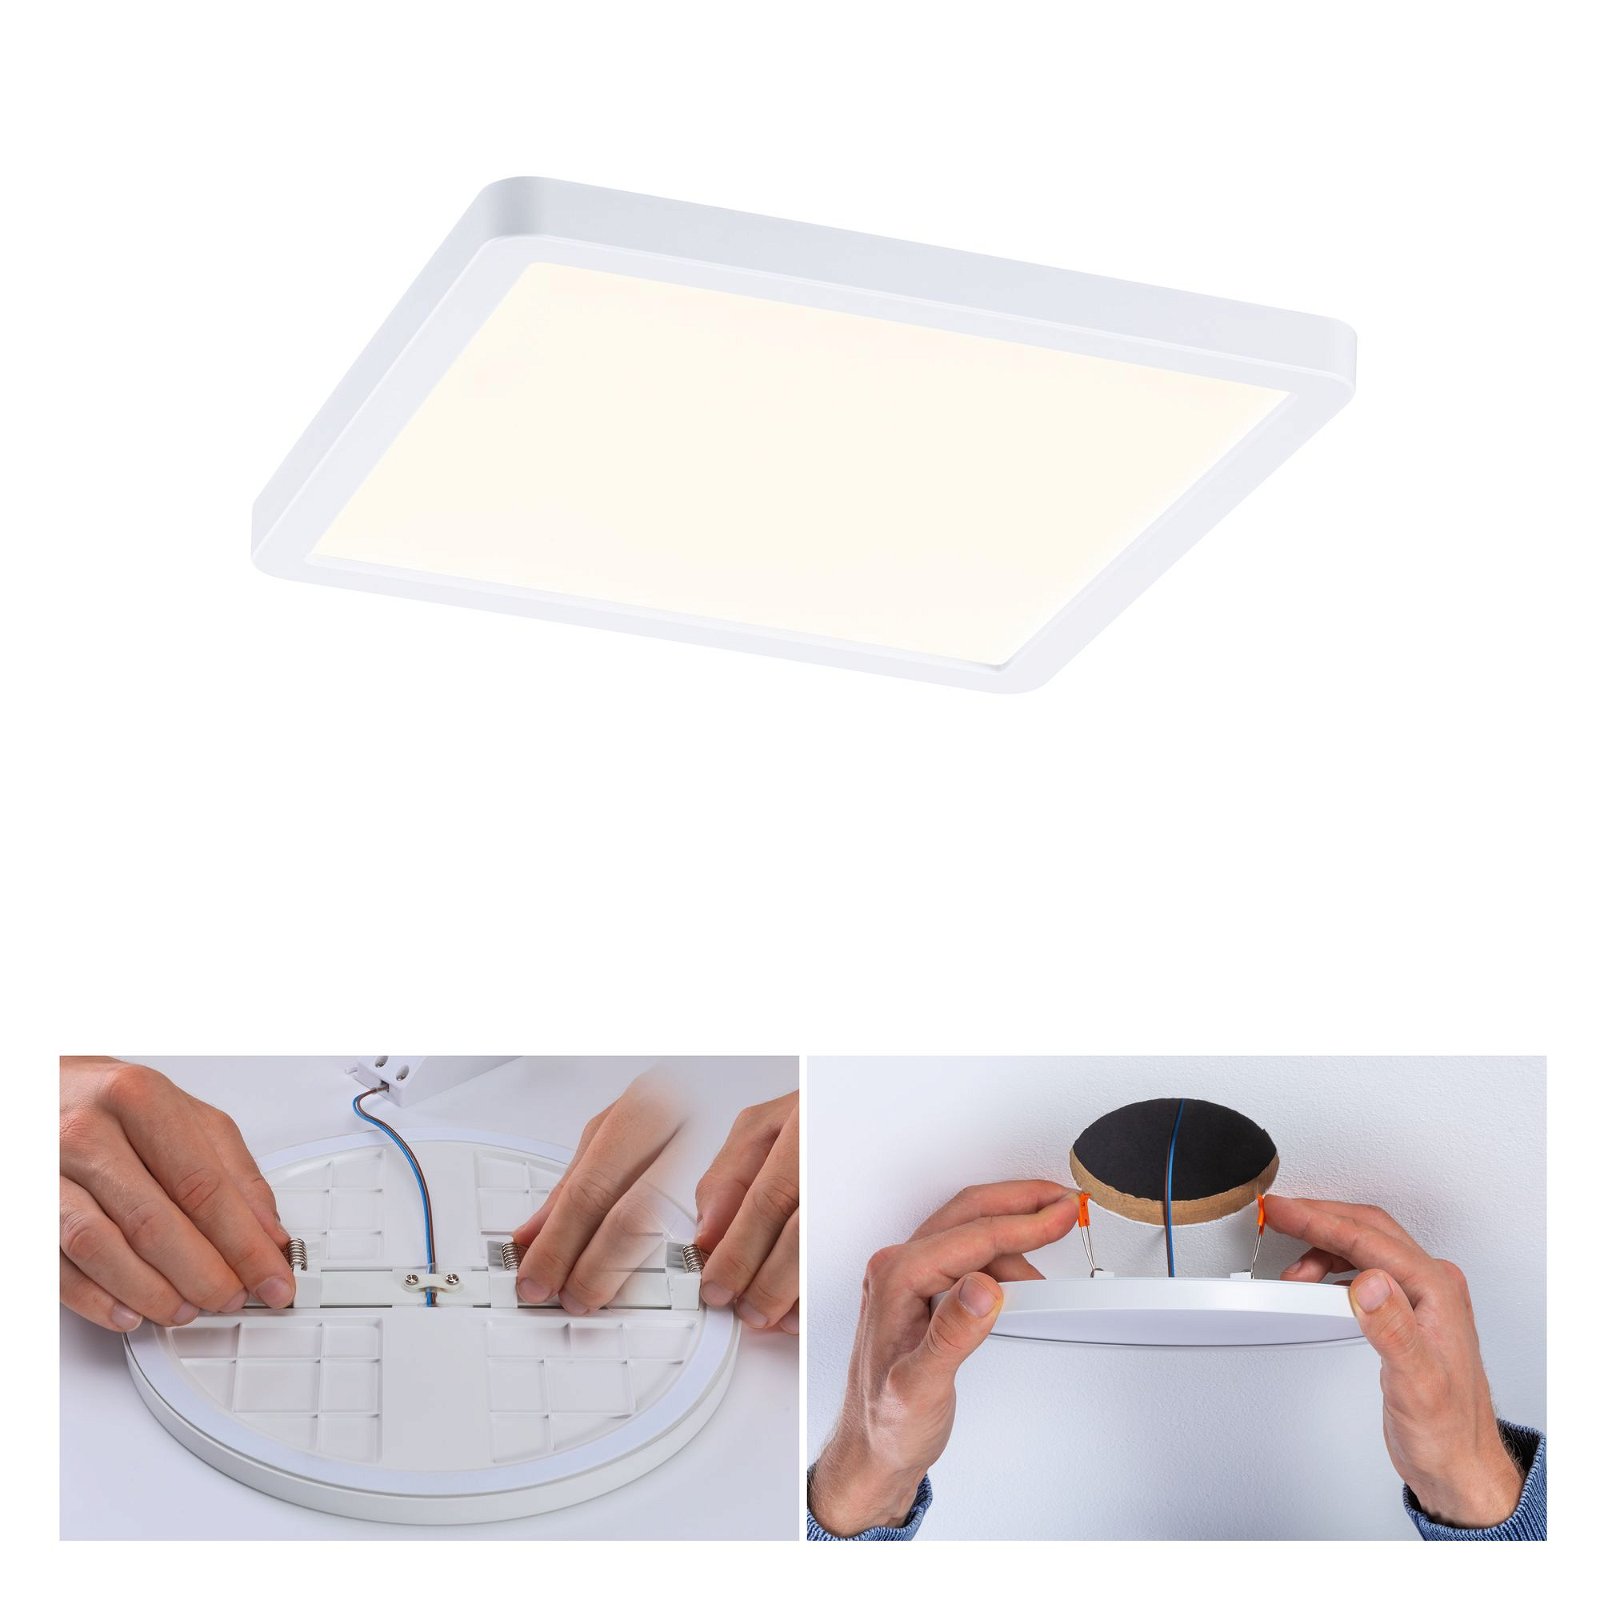 VariFit LED Recessed panel 3-Step-Dim Areo IP44 square 175x175mm 13W 1200lm 3000K White dimmable